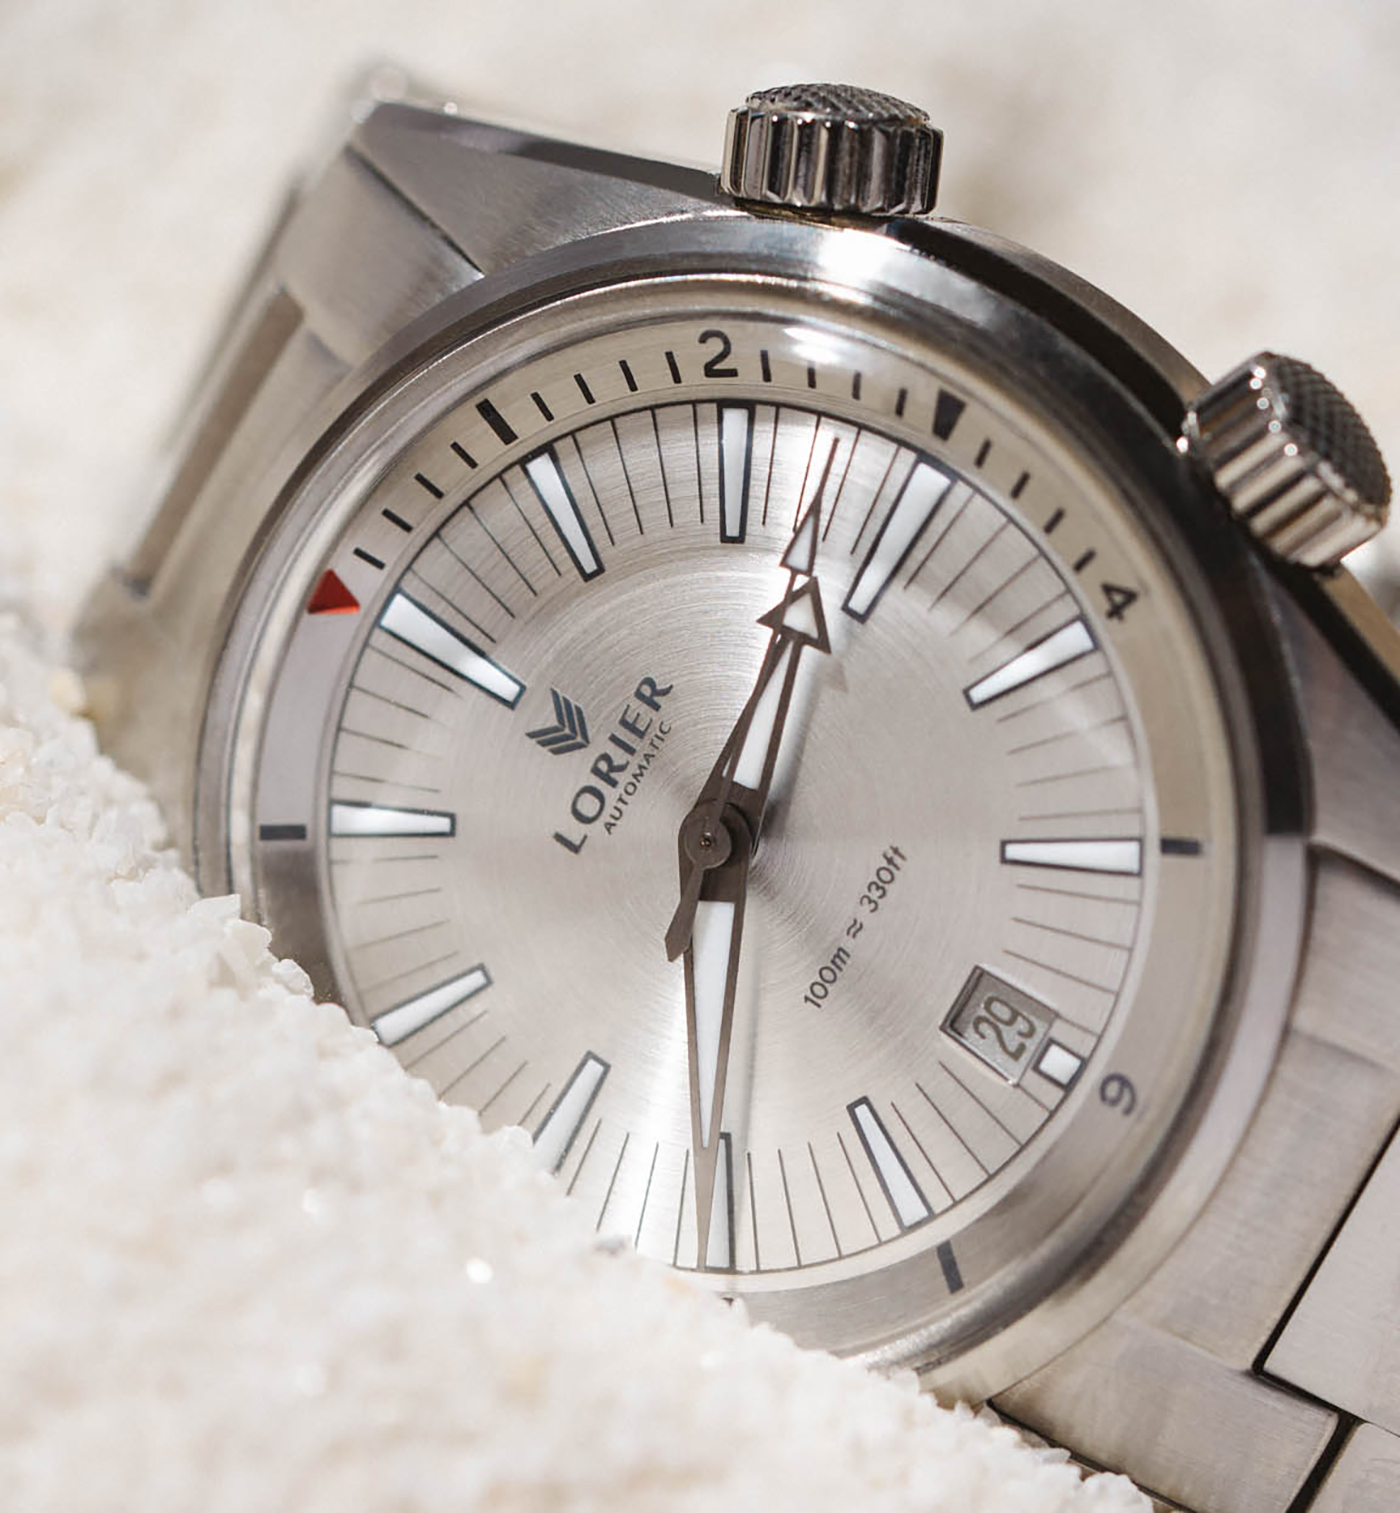 In Review: The Lorier Falcon Series II Automatic Watch